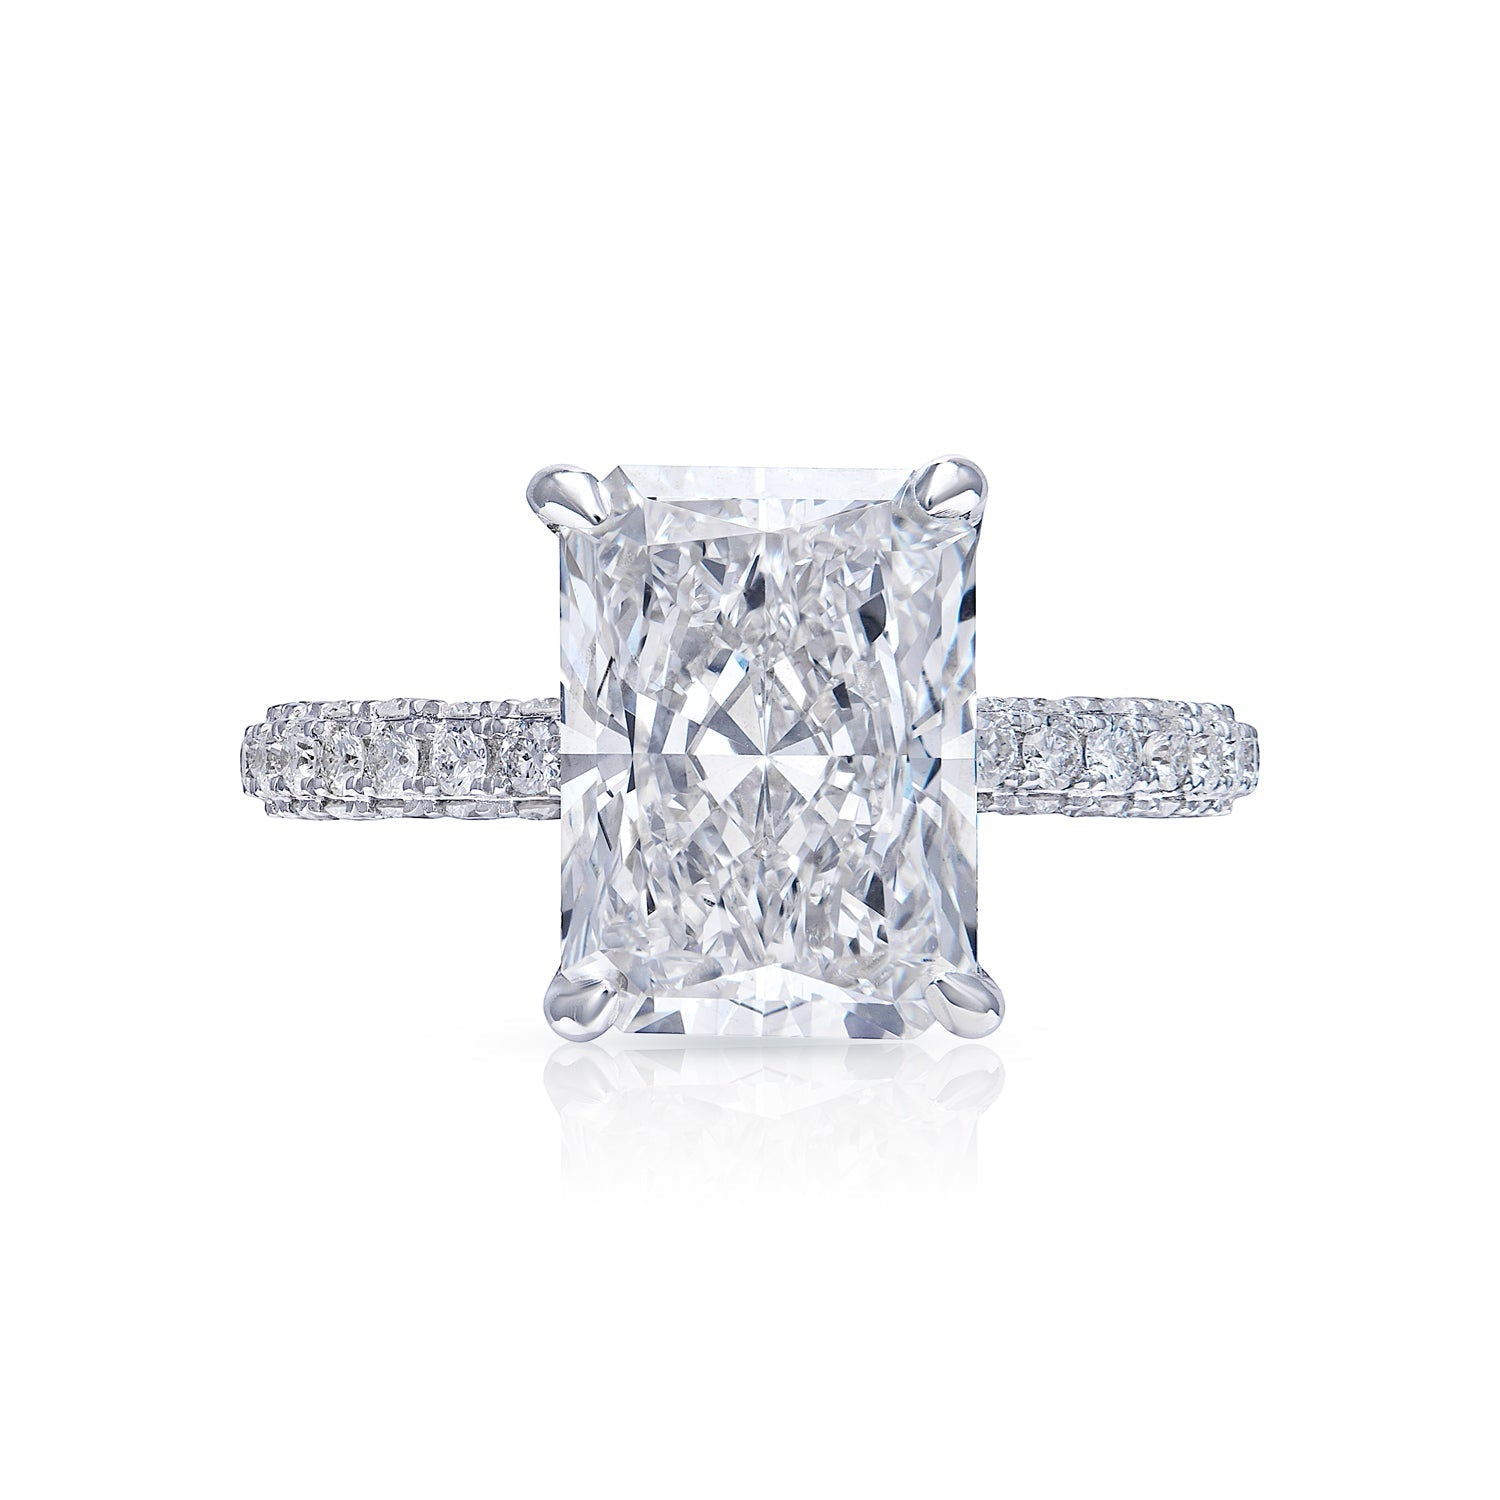 Livia 5 Carats G SI1 Radiant Cut Lab-Grown Diamond Engagement Ring in White Gold Front View